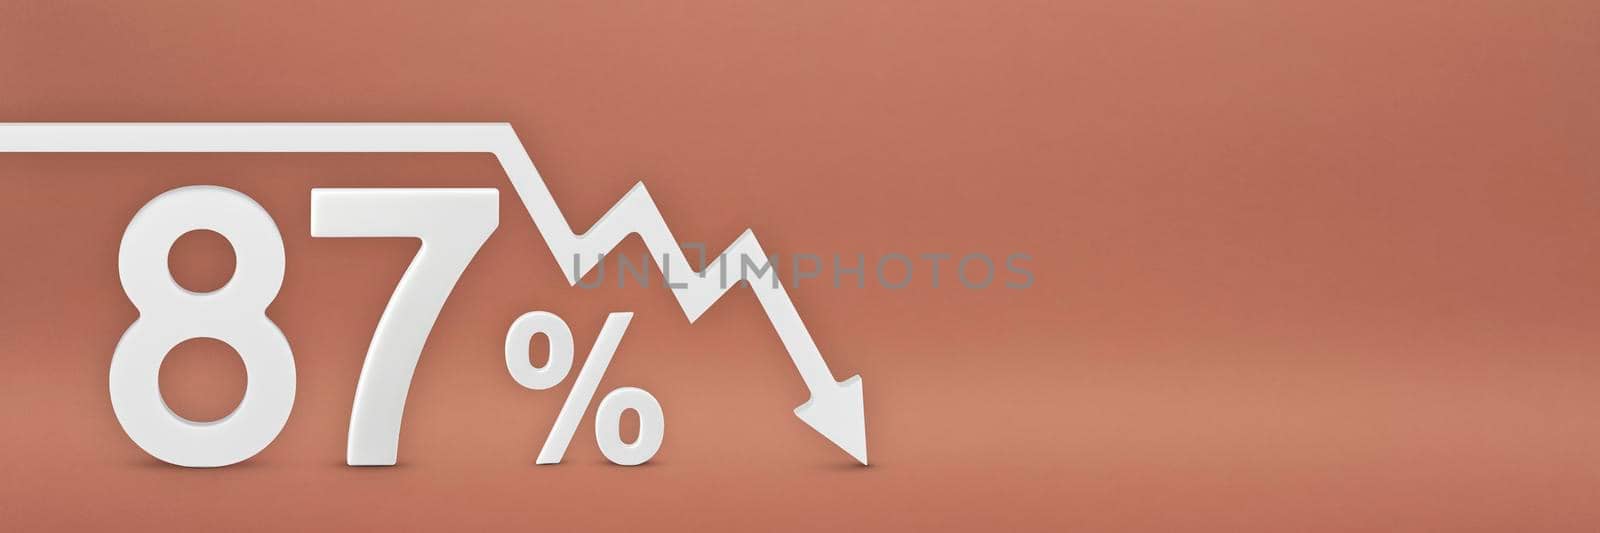 eighty-seven percent, the arrow on the graph is pointing down. Stock market crash, bear market, inflation.Economic collapse, collapse of stocks.3d banner,87 percent discount sign on a red background. by SERSOL